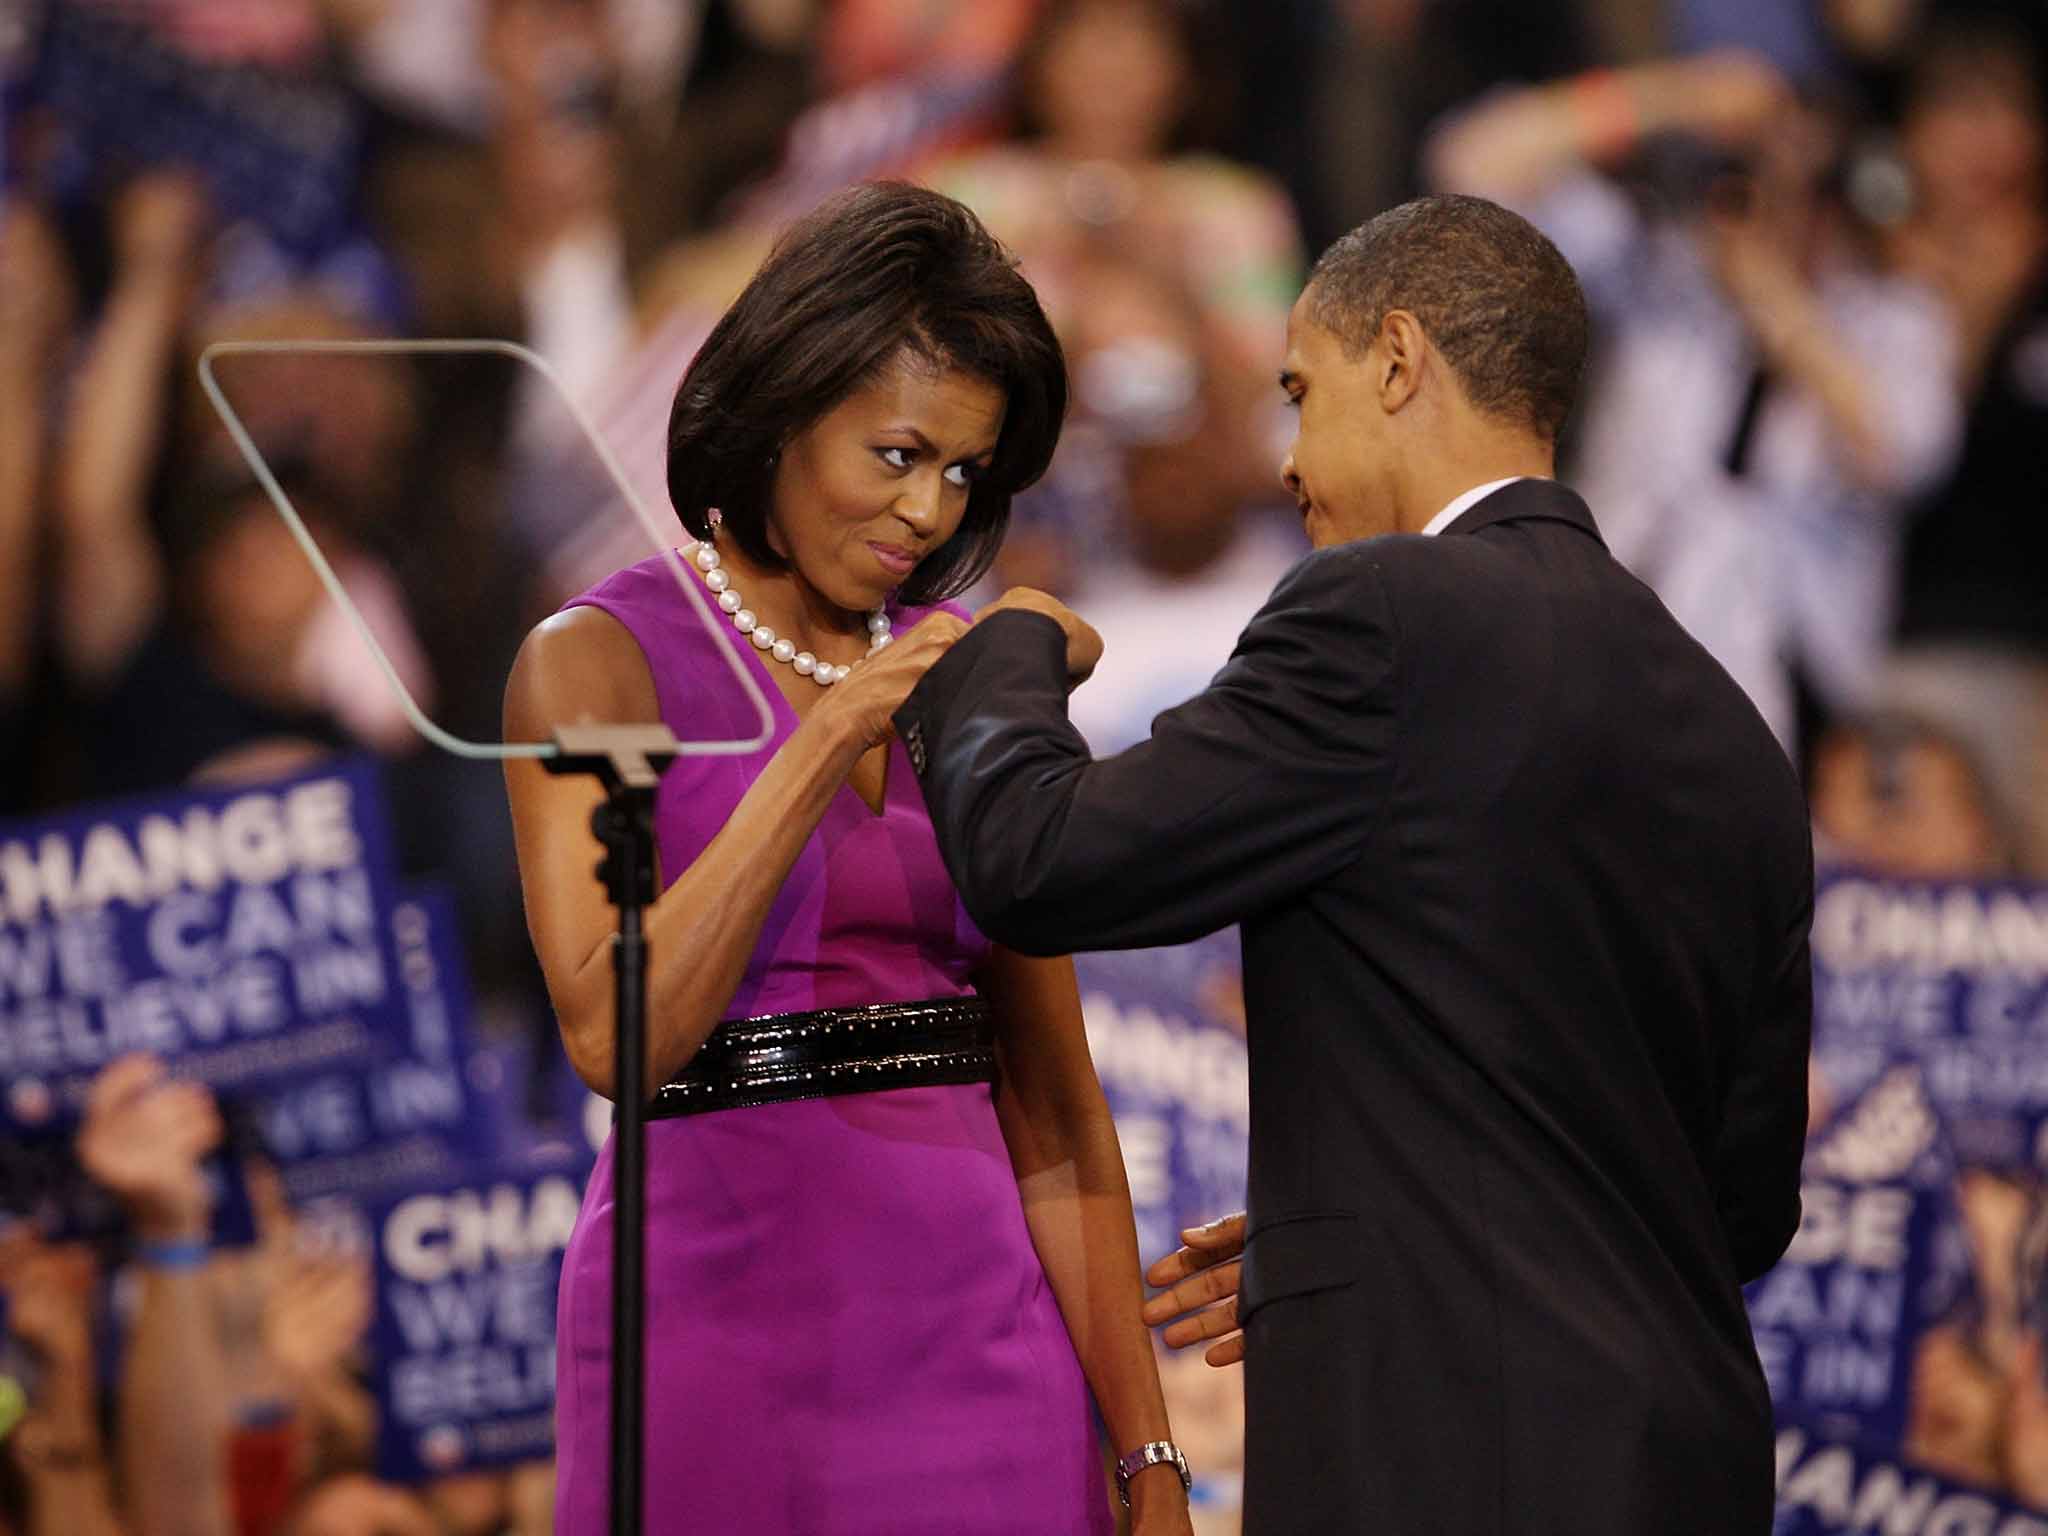 Shake down: Michelle and Barack Obama bump knuckles before an election night rally in Minnesota in 2008, the 'Washington Post' called it 'the fist bump heard round the world'